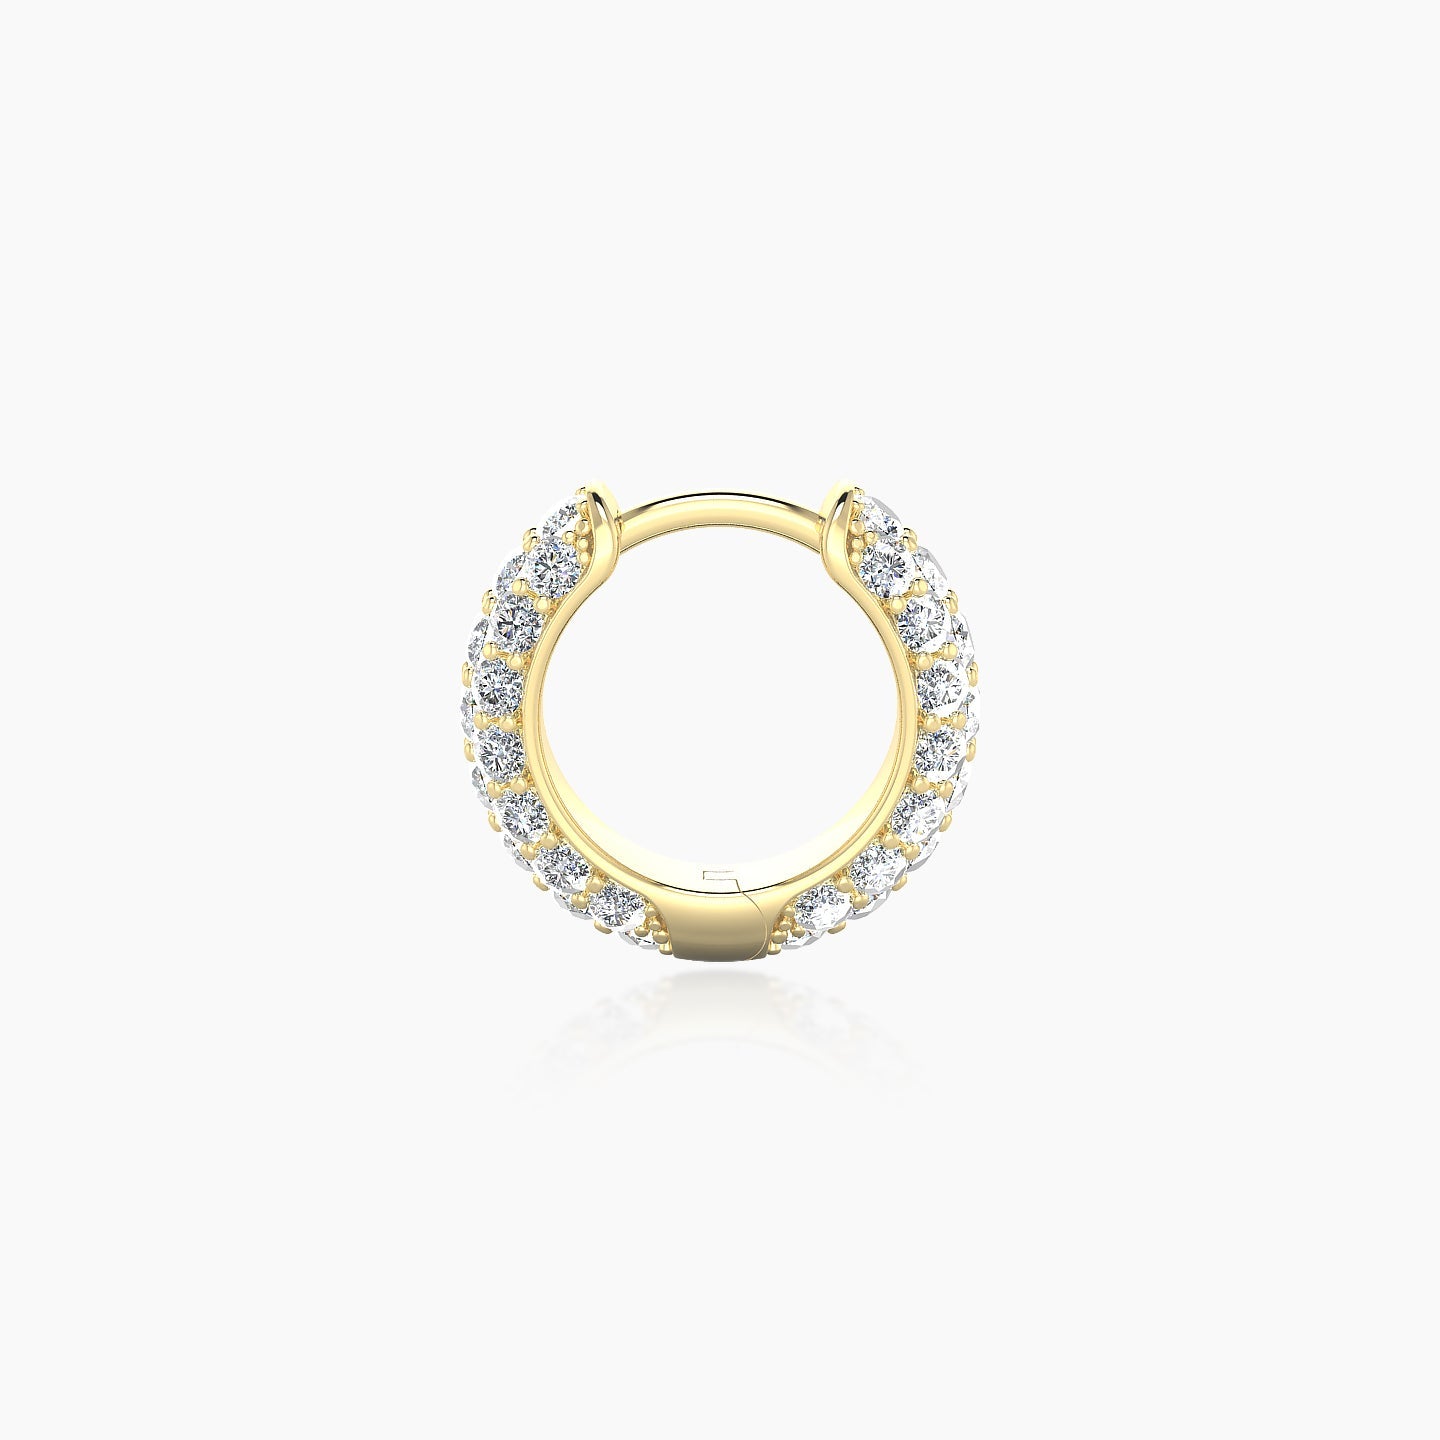 Theia | 18k Yellow Gold 6.5 mm Pave Diamond Nose Ring Piercing